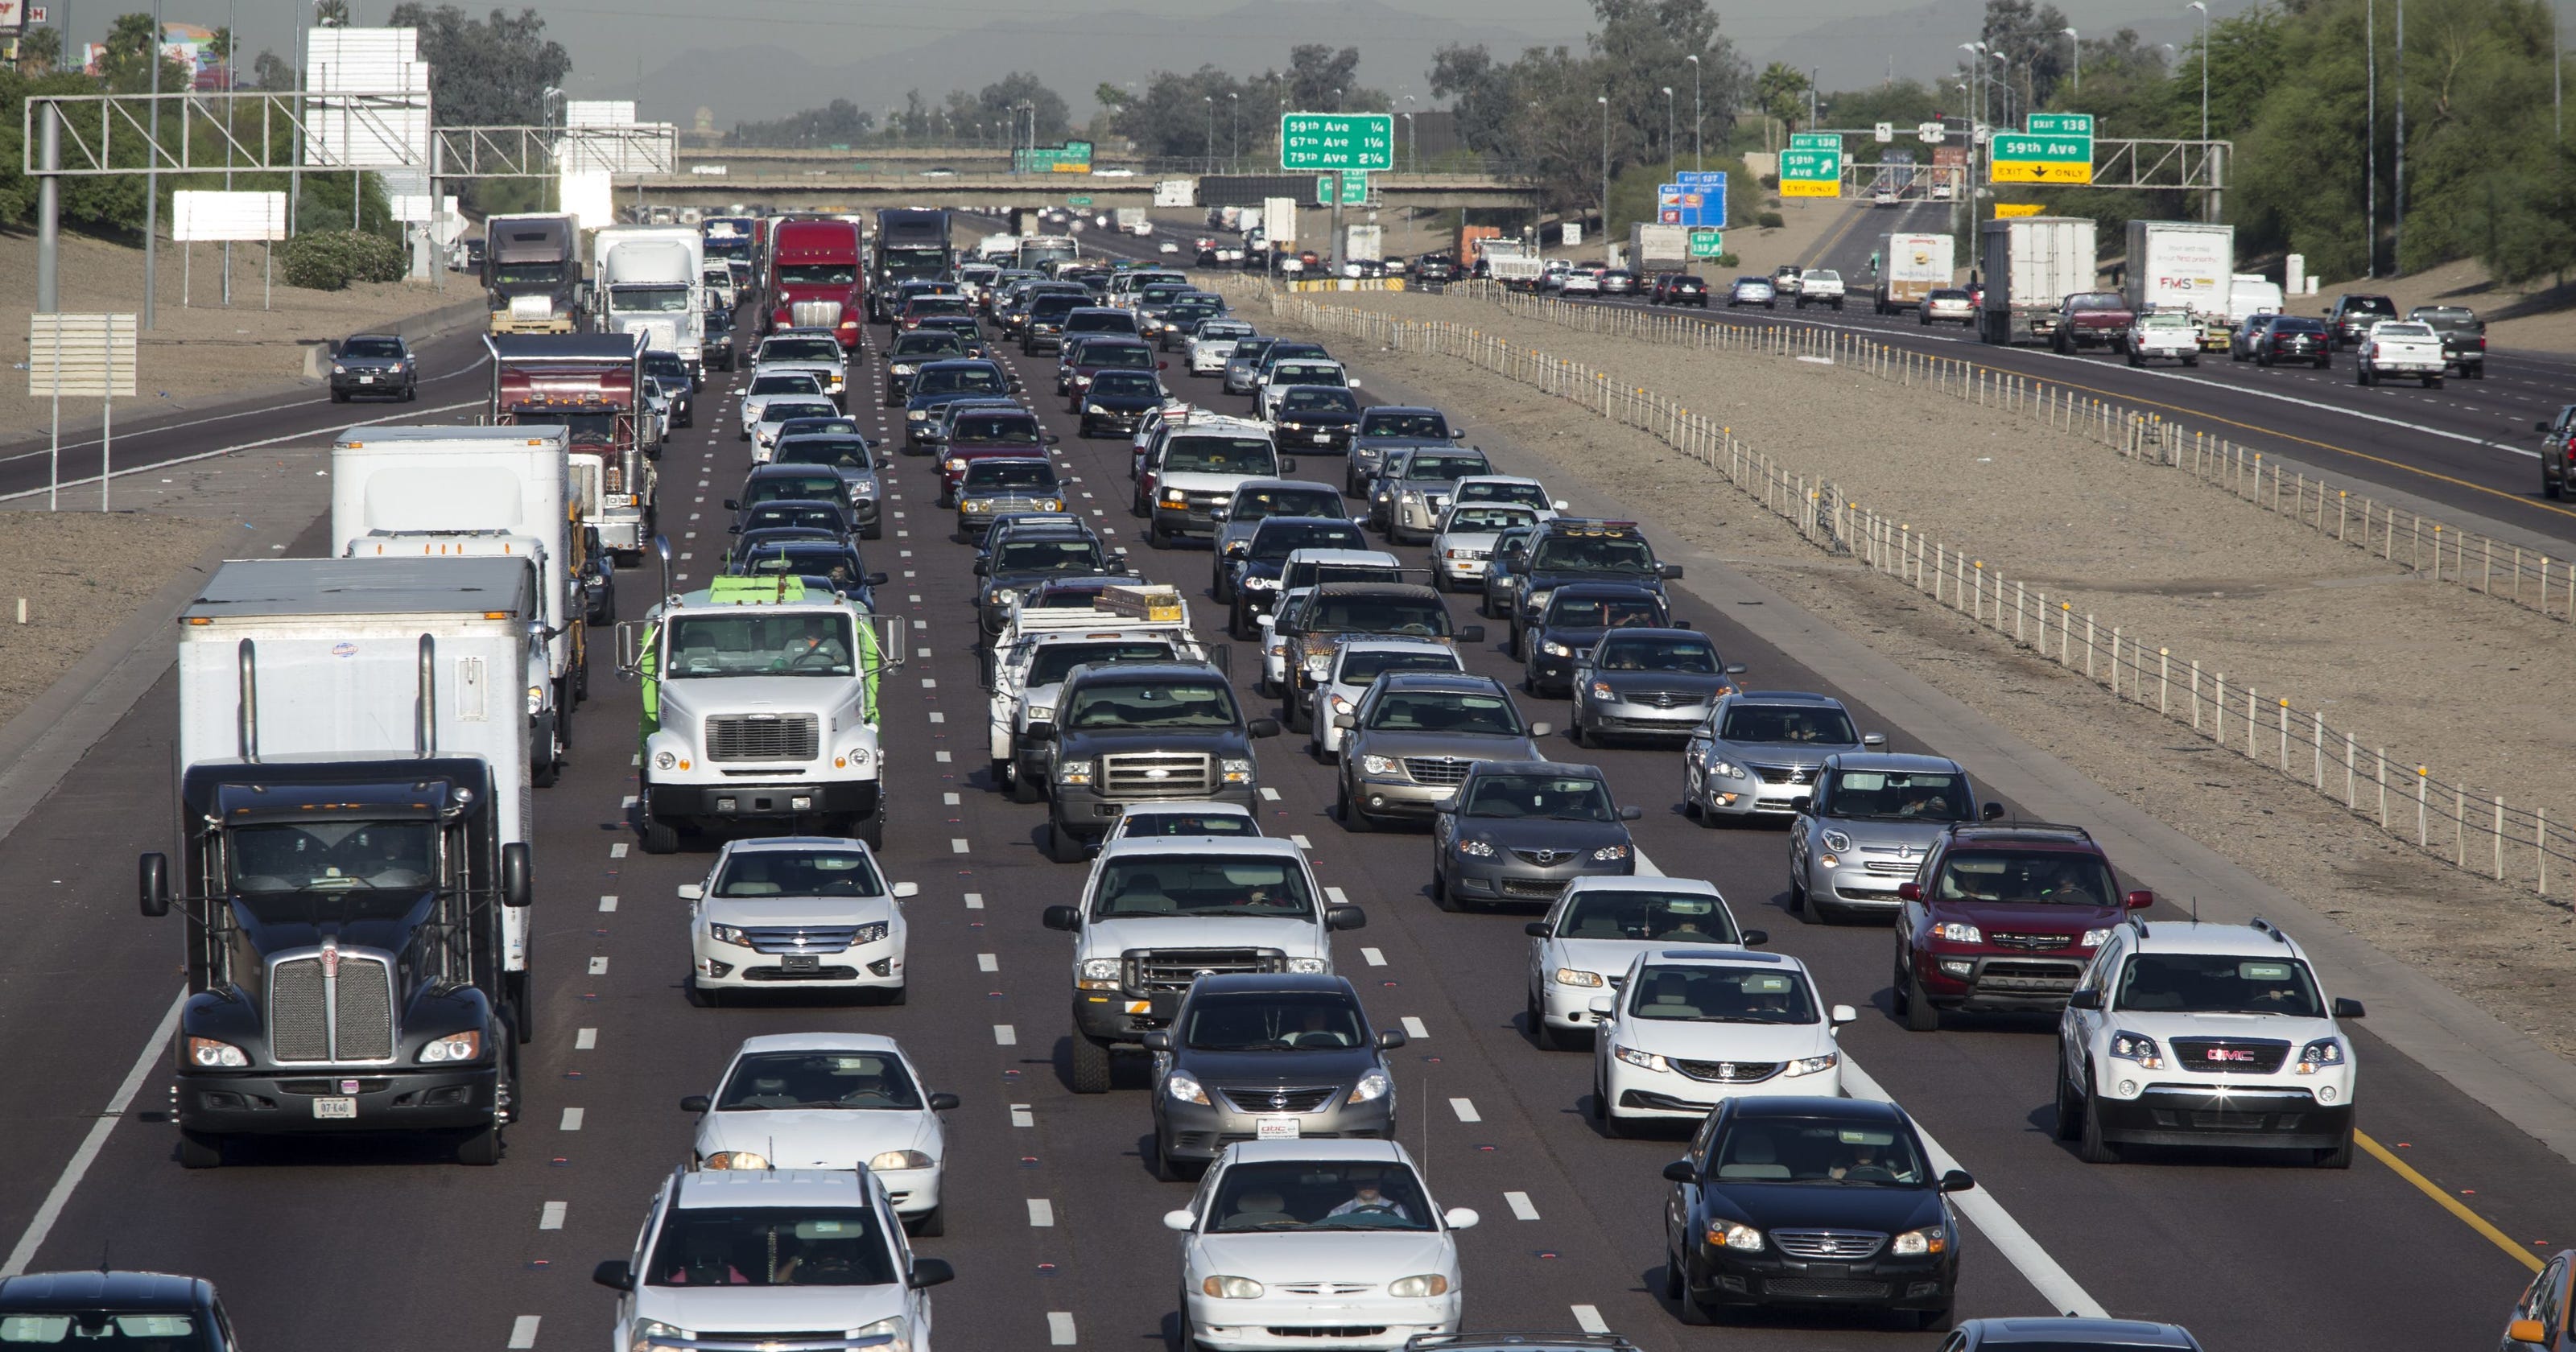 Weekend traffic: Closure slated for east I-10 in West Valley